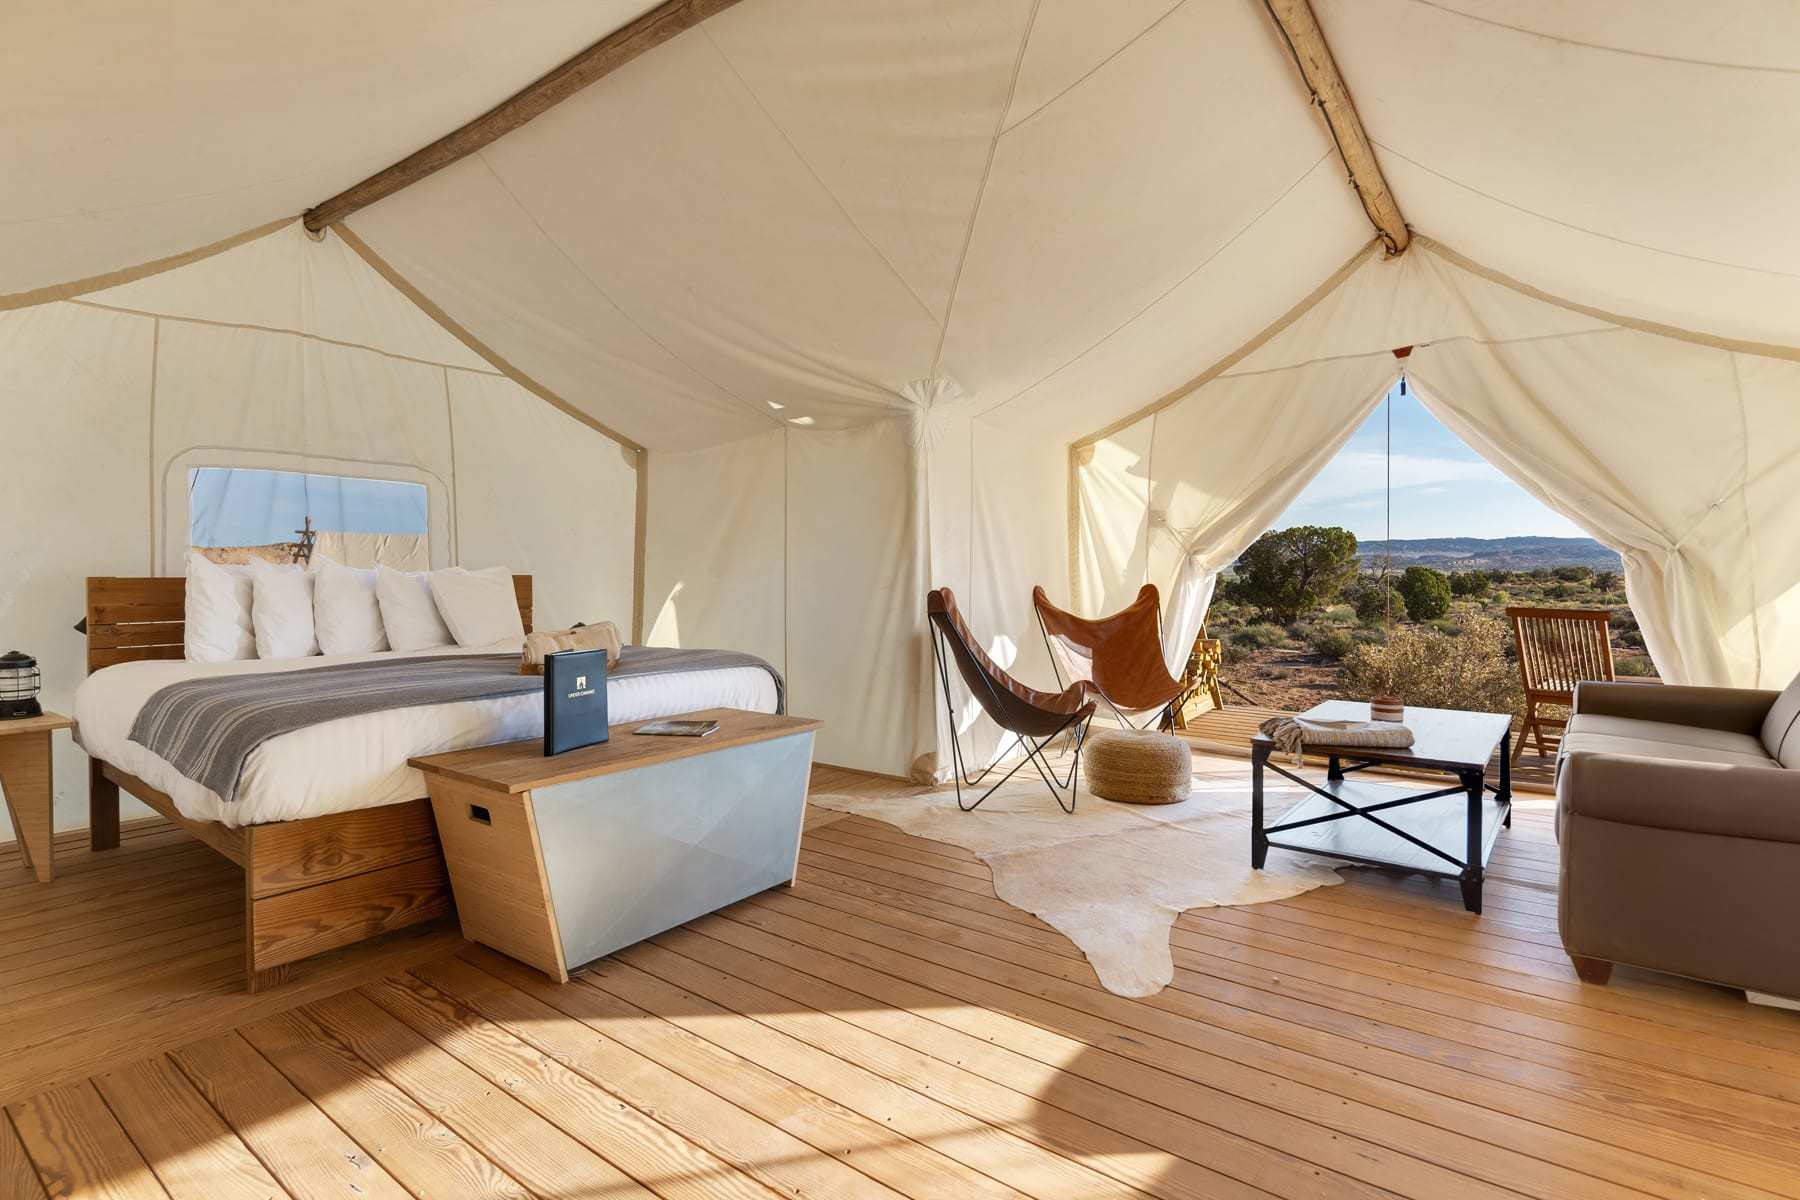 Under Canvas safari glamping tent experience